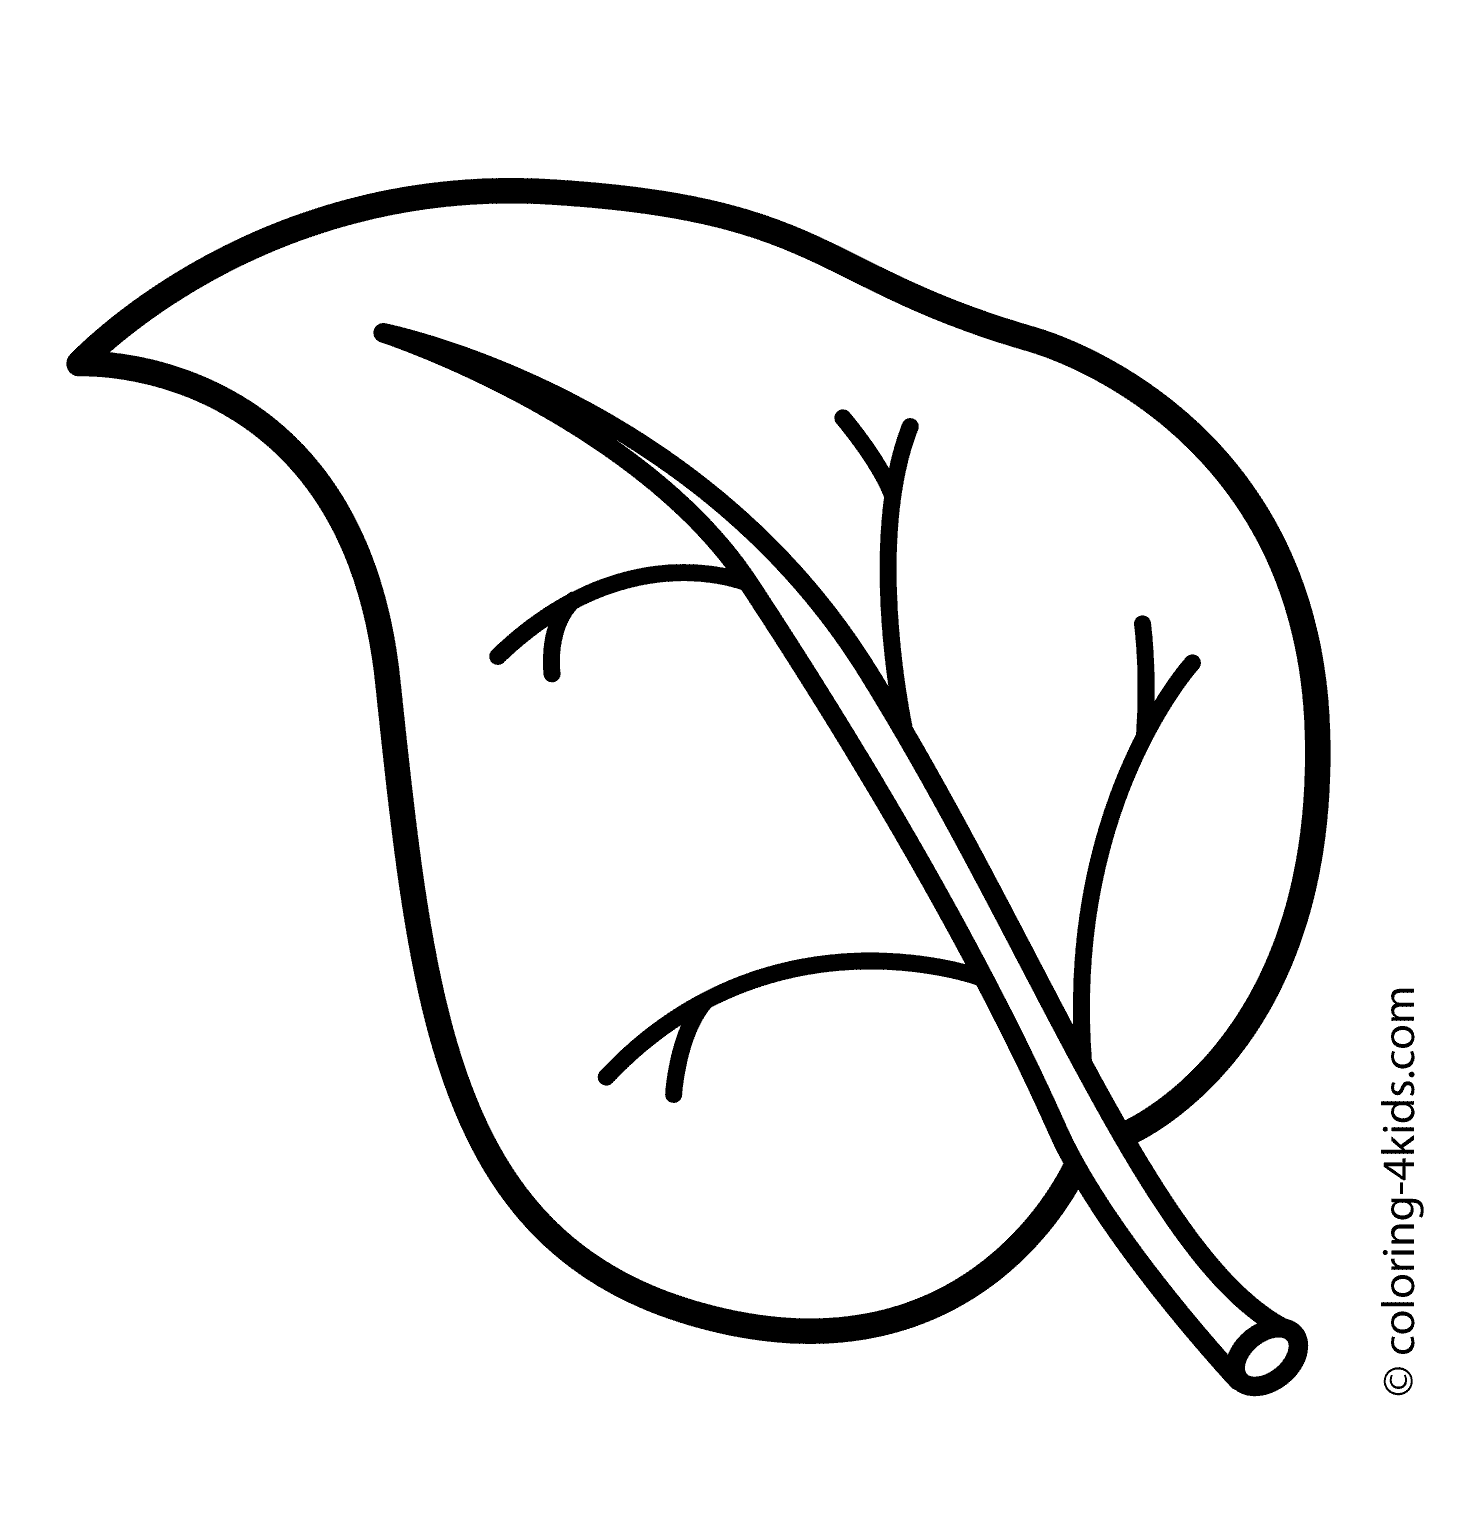 Free Leaves Coloring Pages To Print, Download Free Leaves Coloring